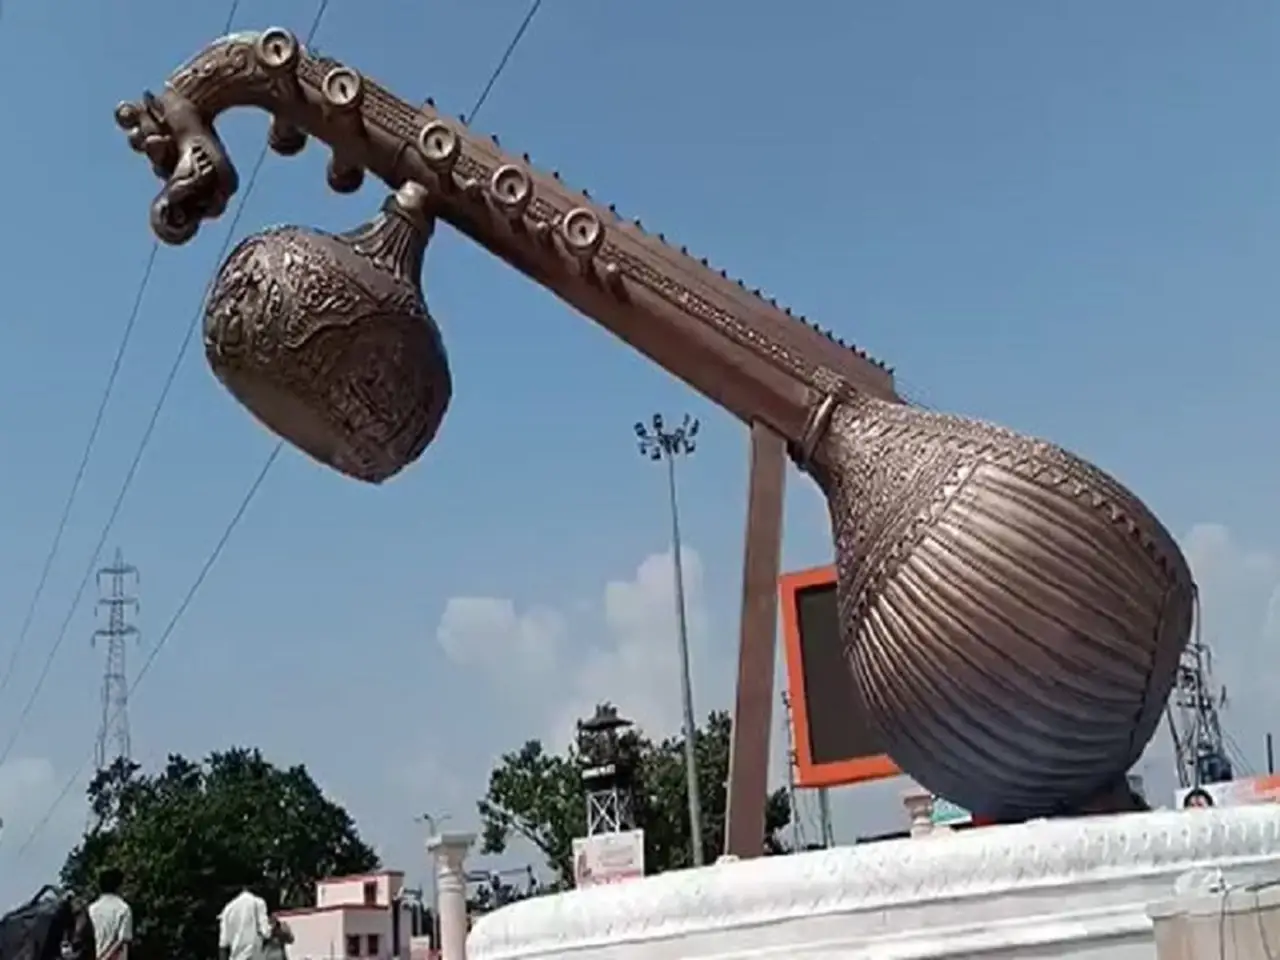 A 40-foot statue of a veena, weighing 14 tonnes, has been installed at a prominent intersection in Uttar Pradesh's Ayodhya